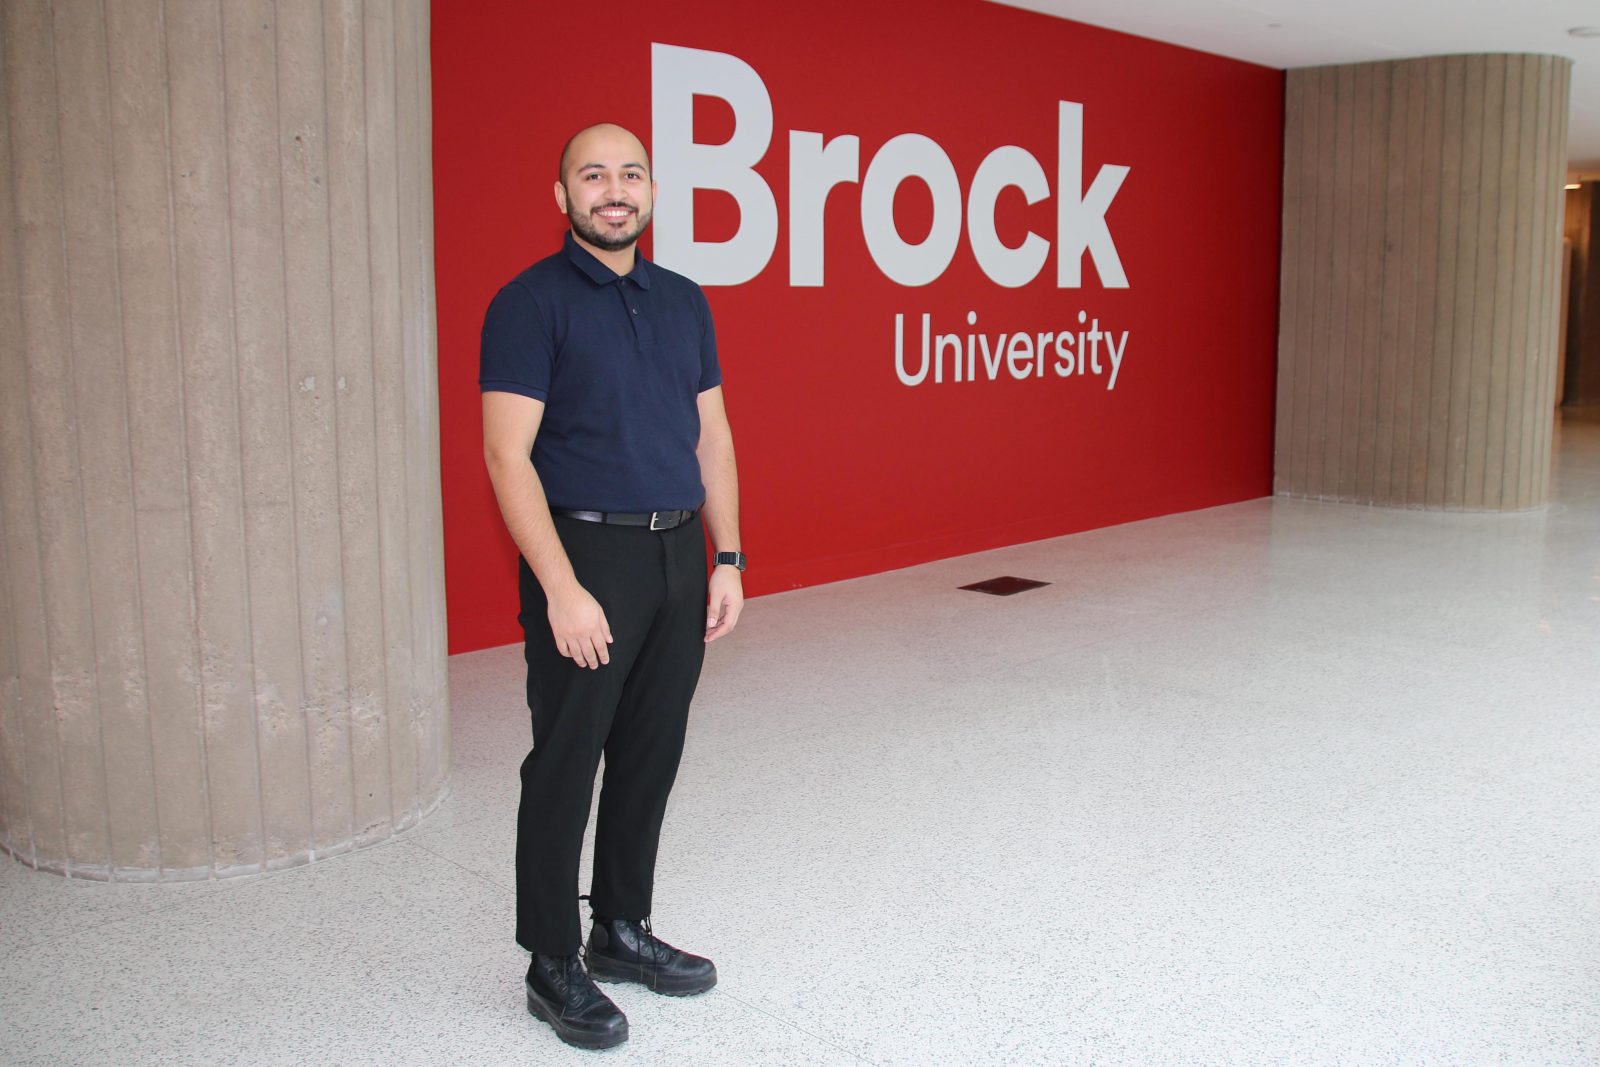 A man stands in front of a large red wall in an indoor atrium that says ‘Brock University.’